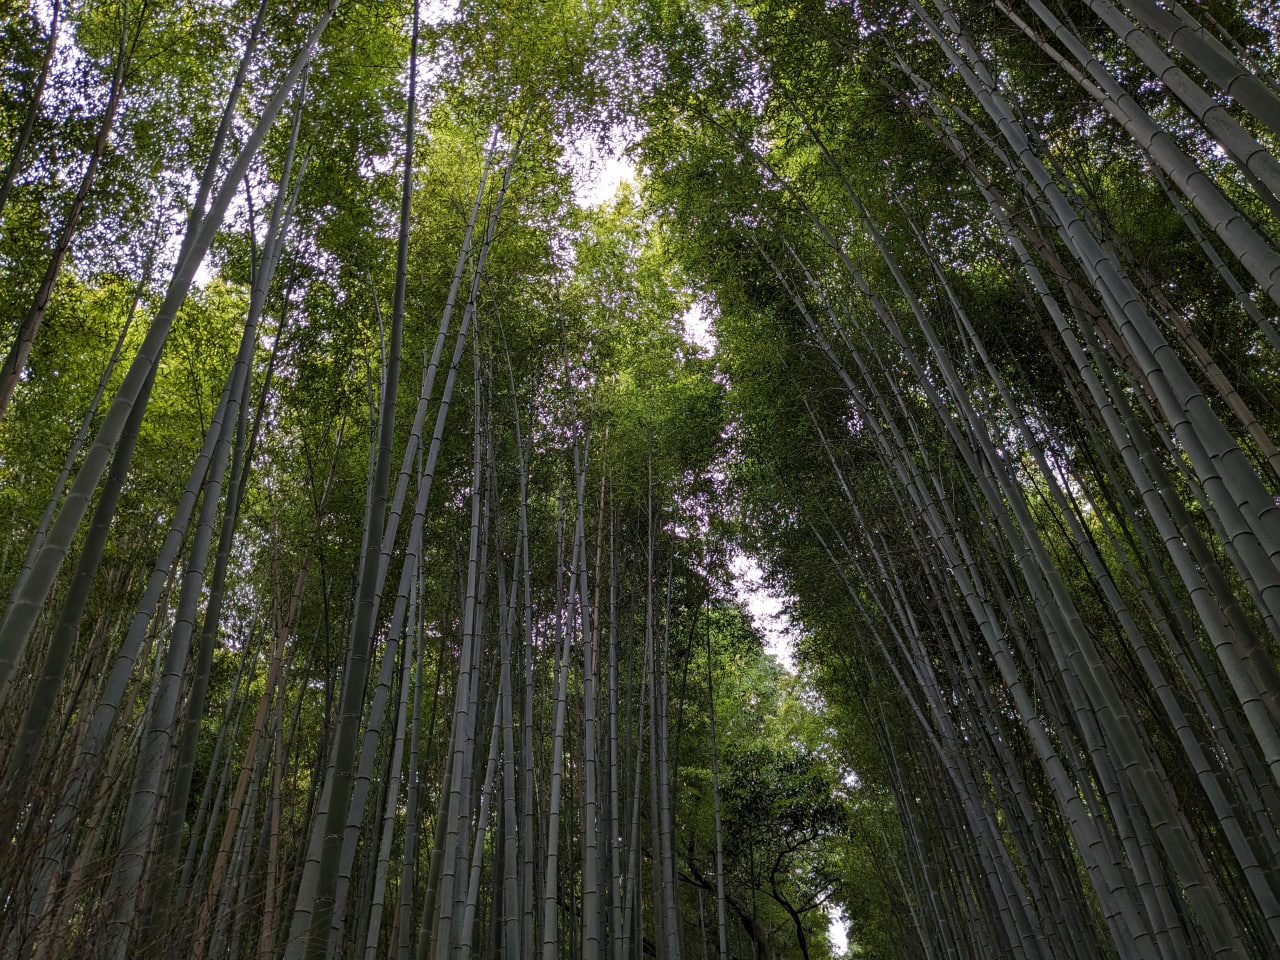 tall bamboo trees with leaves at the very top, letting some light in